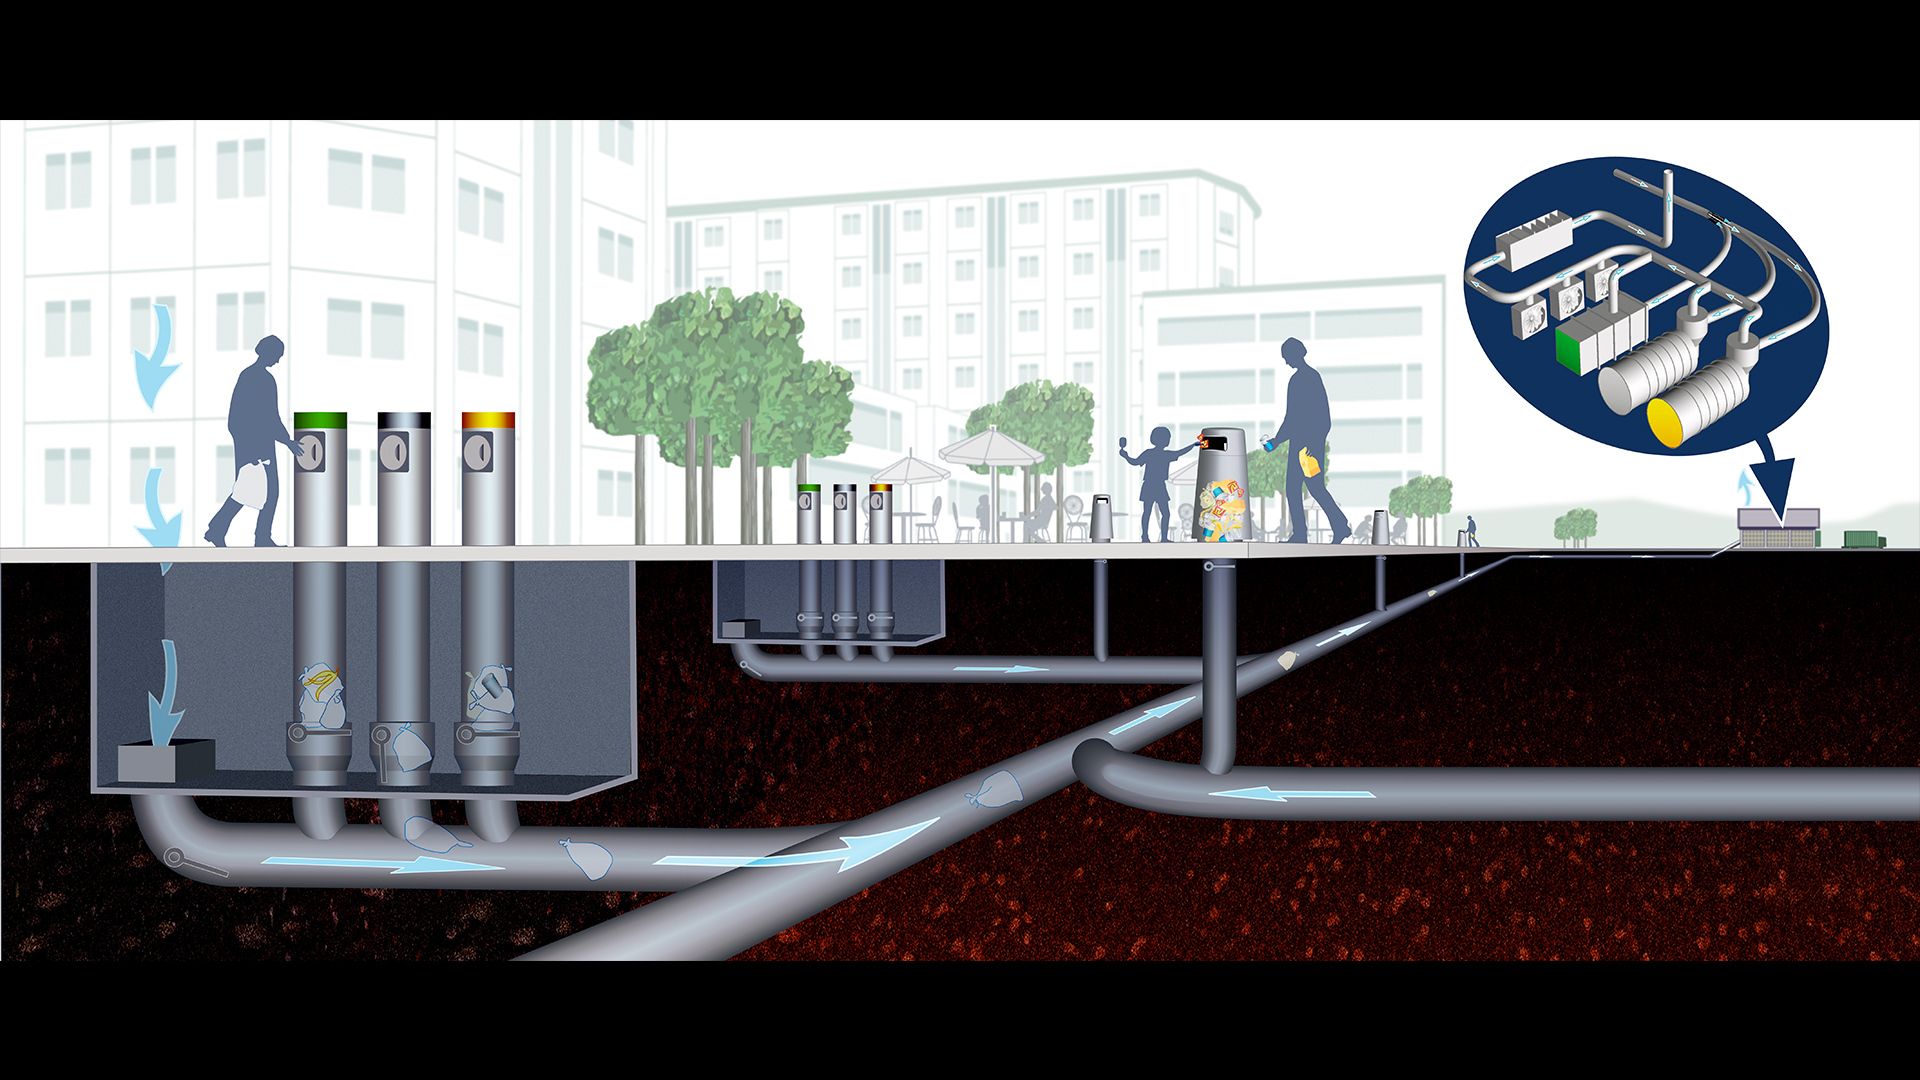 Drawing of Envac's pneumatic tube-based underground waste system. 